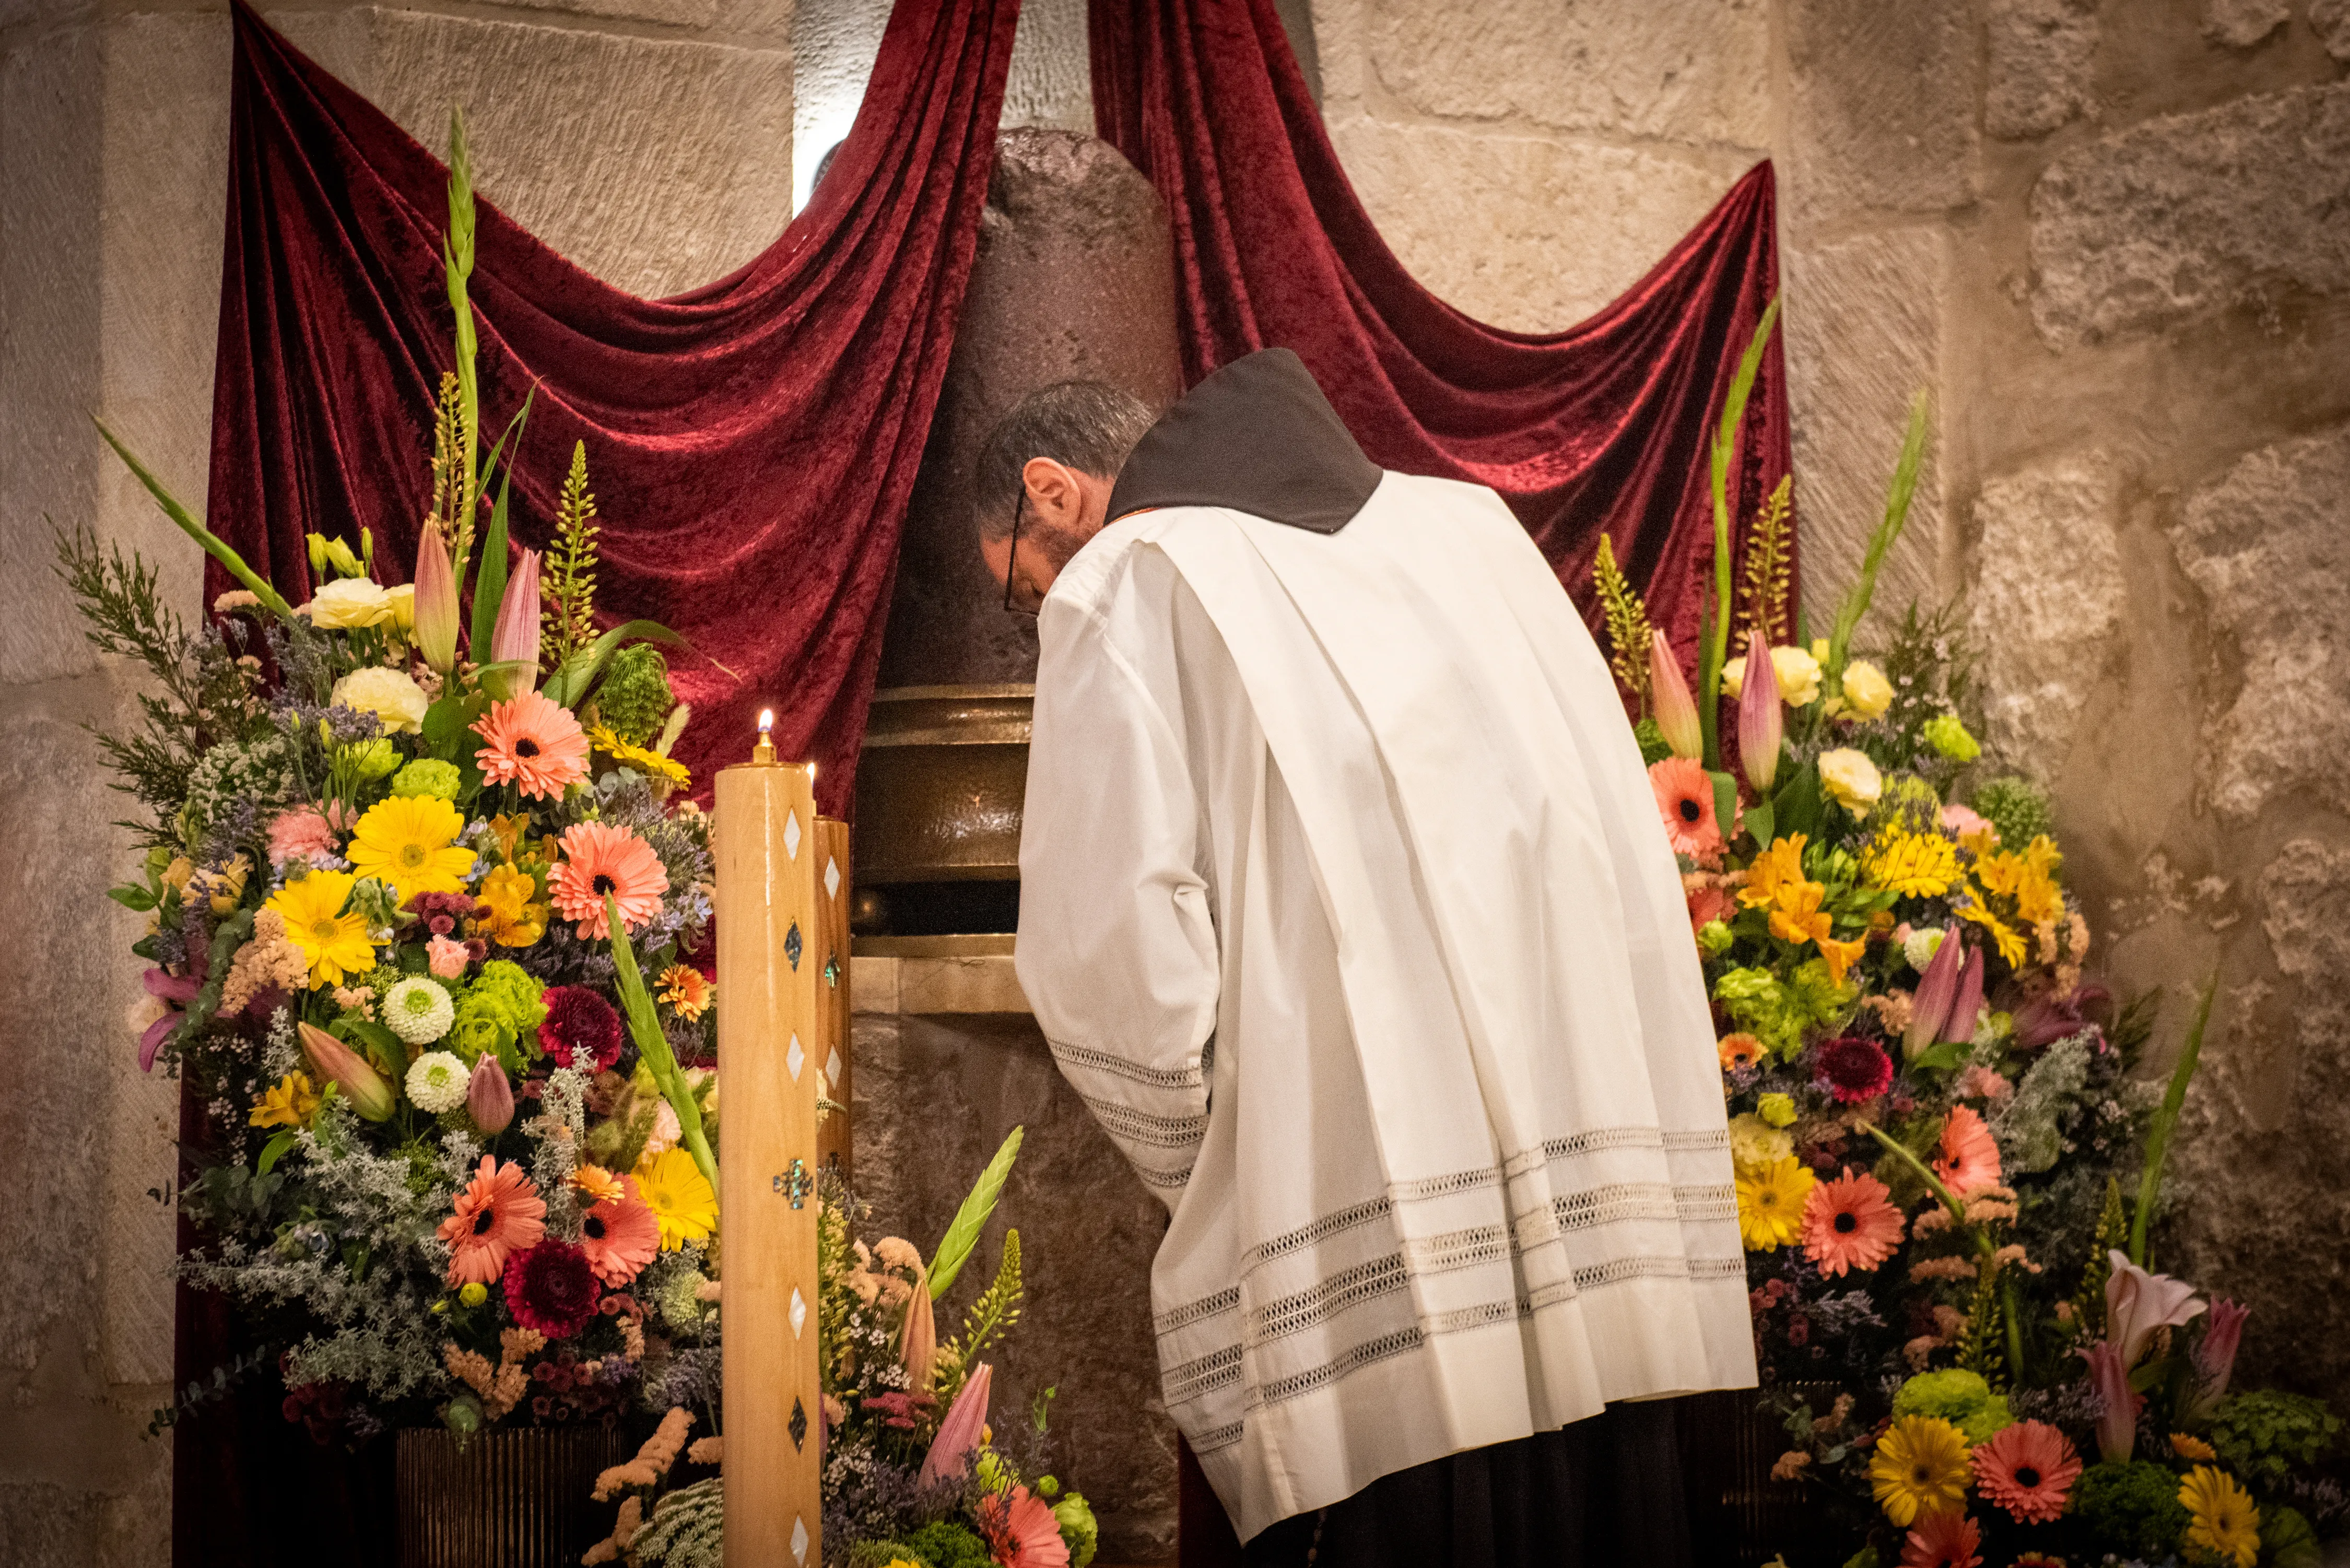 On Holy Wednesday, the friars of the Custody of the Holy Land venerated the column to which, according to tradition, Jesus was bound to be scourged. They prayed the station dedicated to the column during the daily procession that the Franciscans perform inside the Basilica of the Holy Sepulcher. At the end, they intoned the hymn “Columna Nobilis” and then, one by one, they performed an act of veneration. March 27, 2024.?w=200&h=150